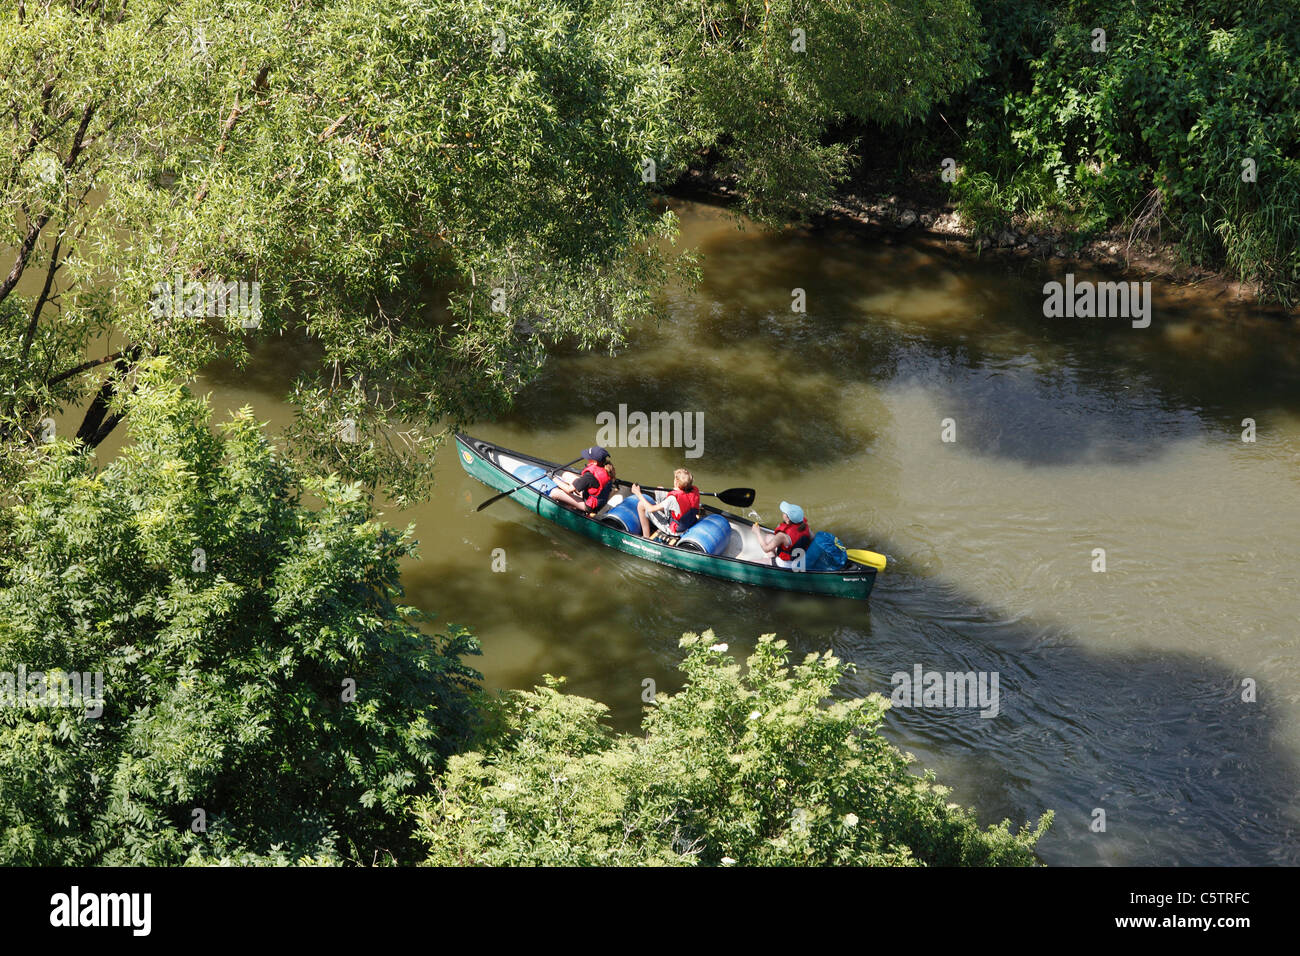 Germany, Bavaria, Franconia, Middle Franconia, View of canoe on altmuehl river, Stock Photo